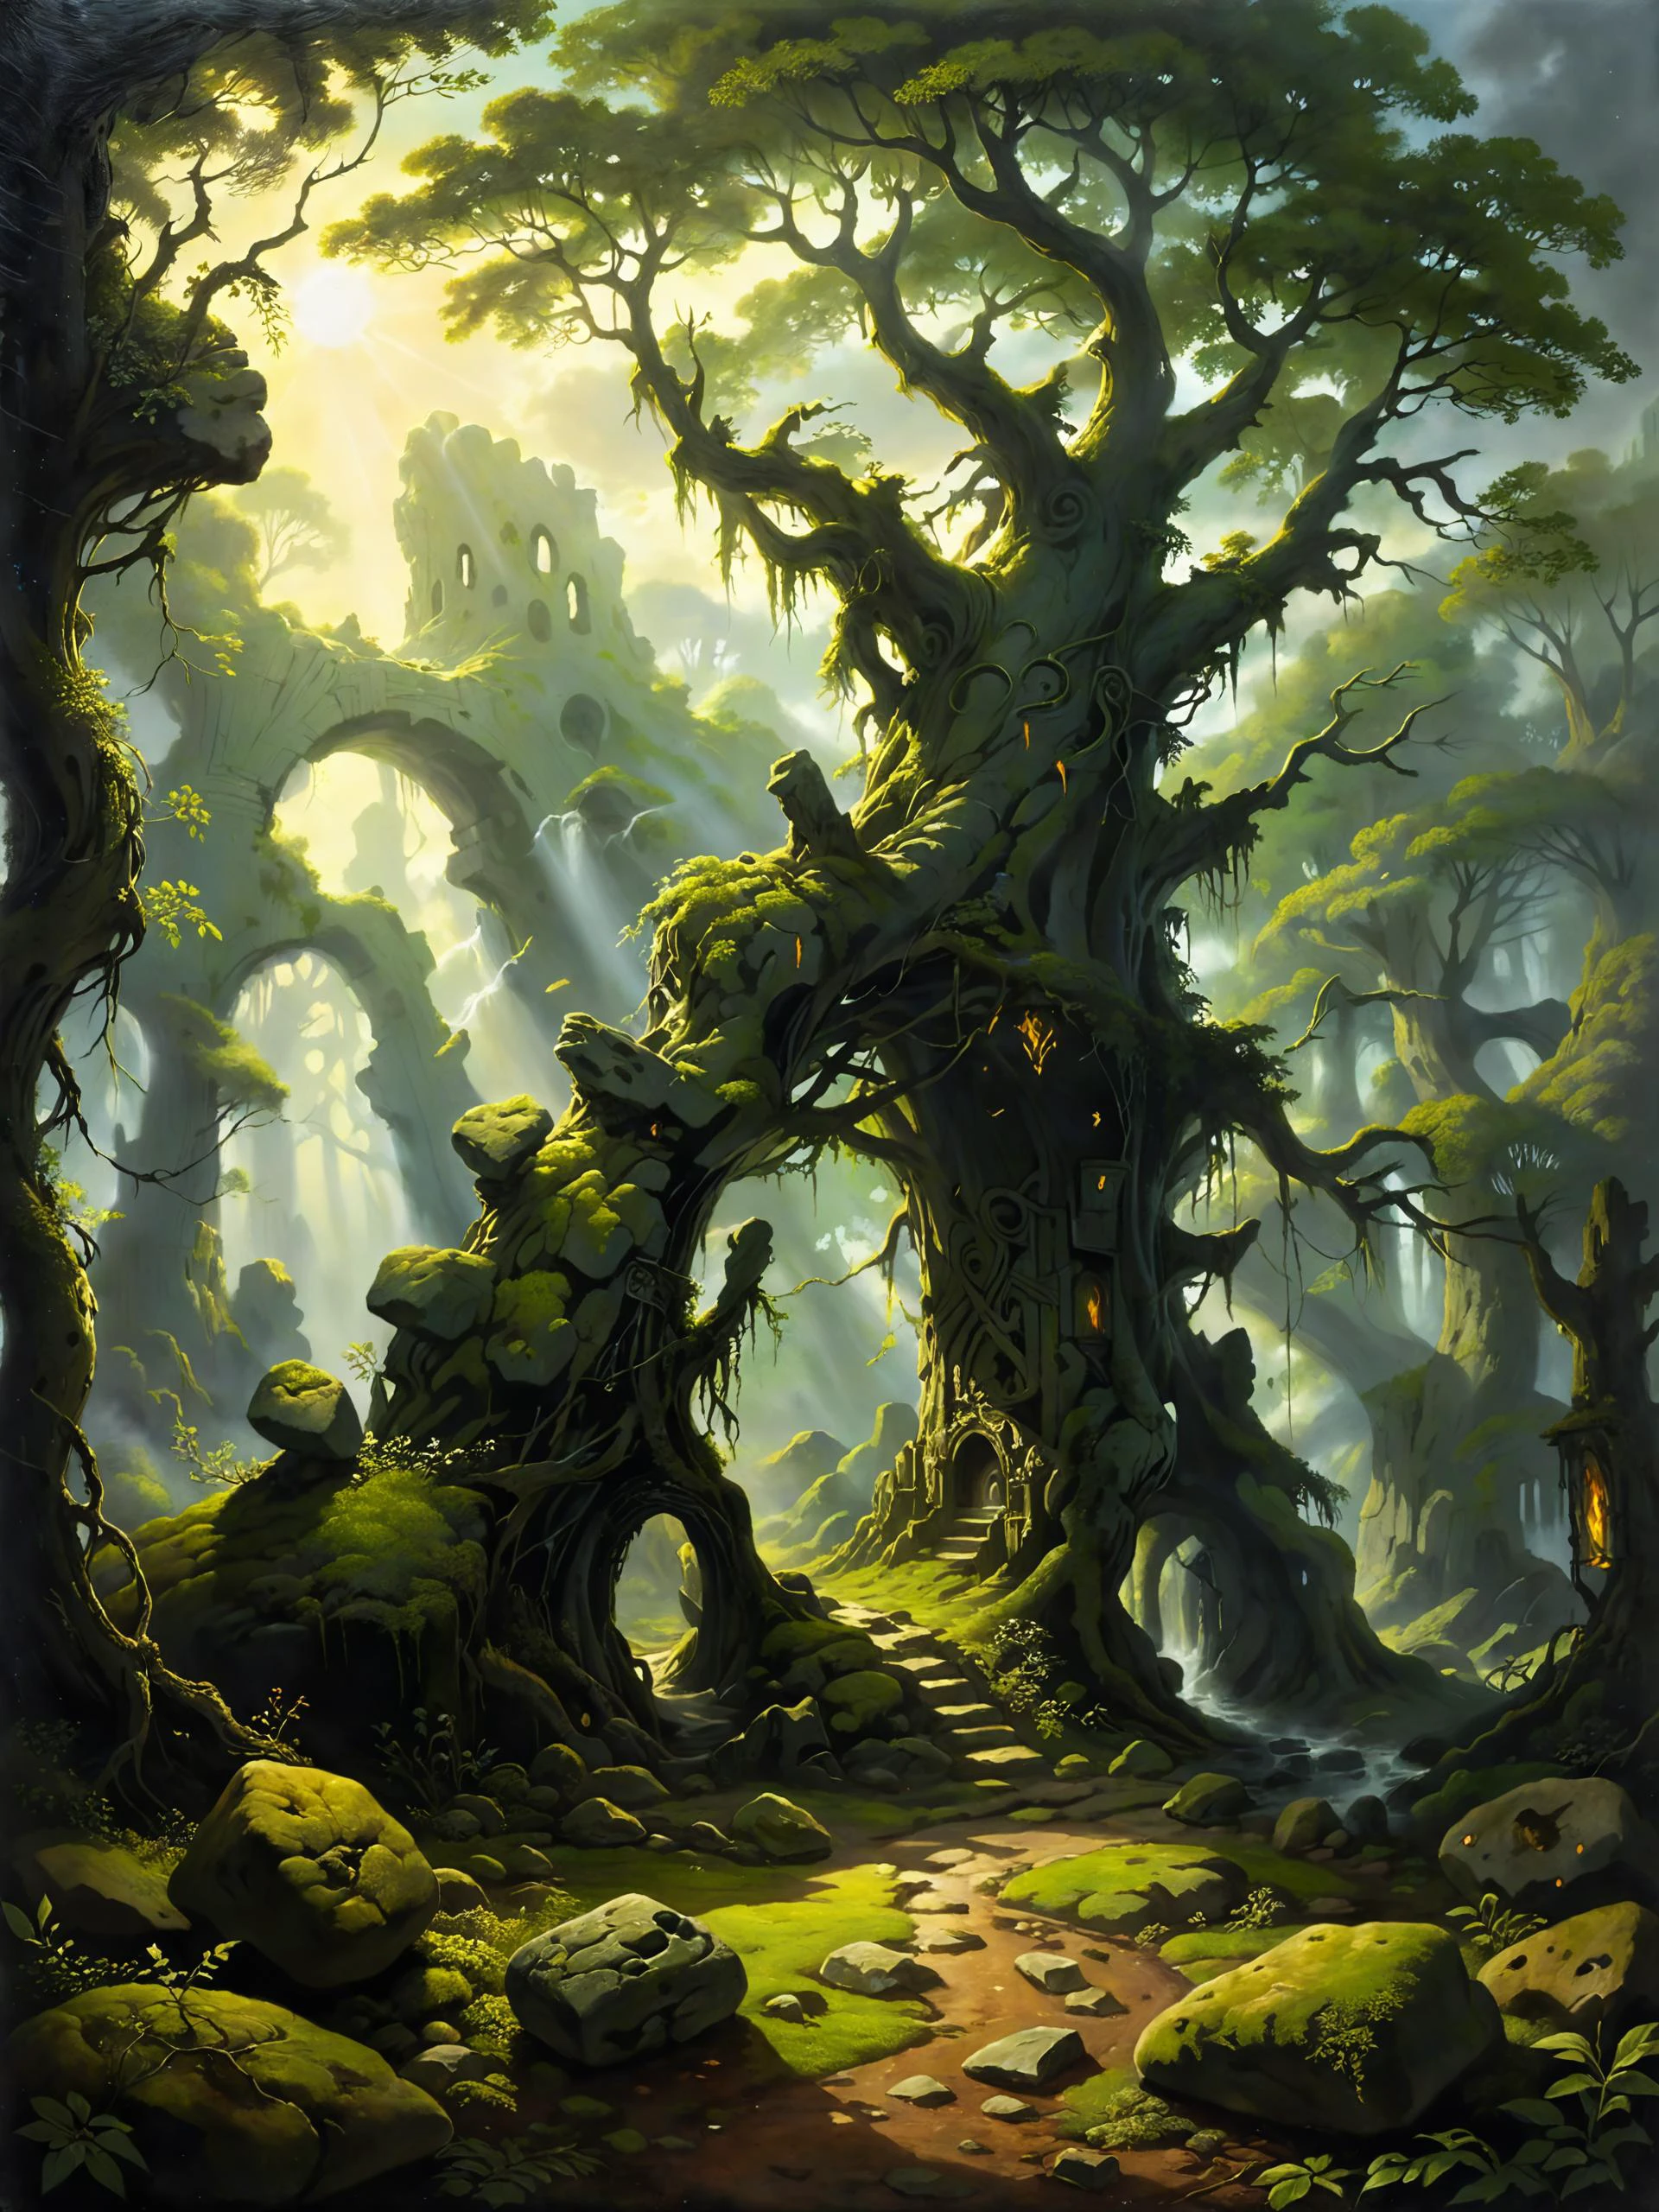 famous oil painting about fate and destiny, by (roger dean:1.2) and g30rg3b4rr3tsr, in the heart of an ancient overgrown gnarled forest, whispers of the wyrd drift through the tangled branches, mystical runes etched into ancient stones mark the intersection of mortal paths and cosmic forces, moss-coverd outliers, standing stones, magic, magical, dramatic sky, dappled light, dark corners, low-key, atmospheric, aesthetic, ethereal, ultra detailed